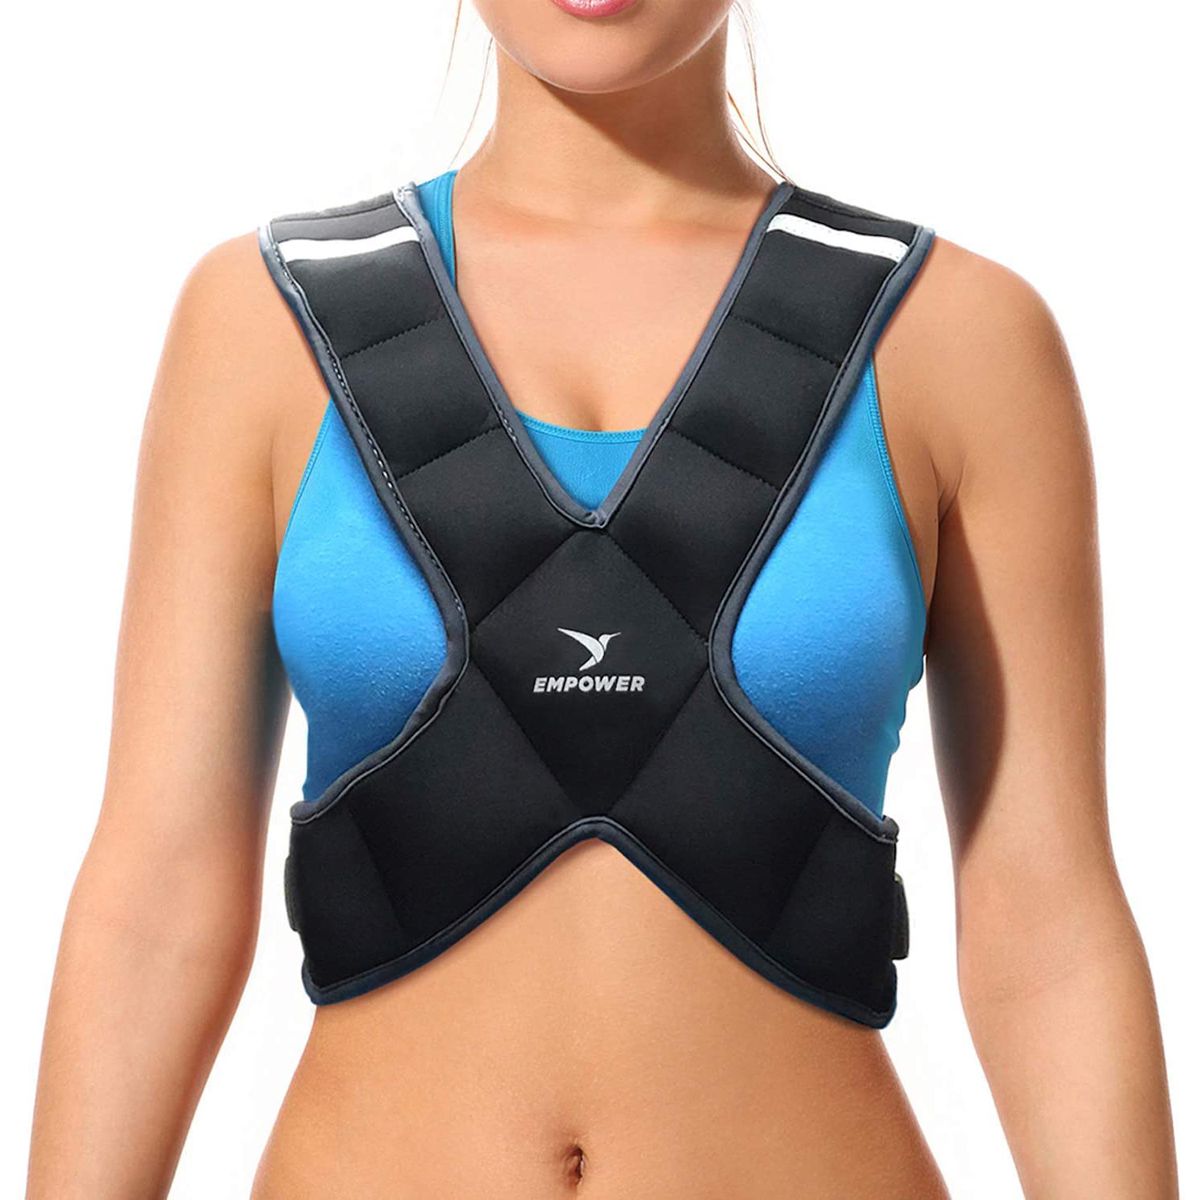 weighted vests